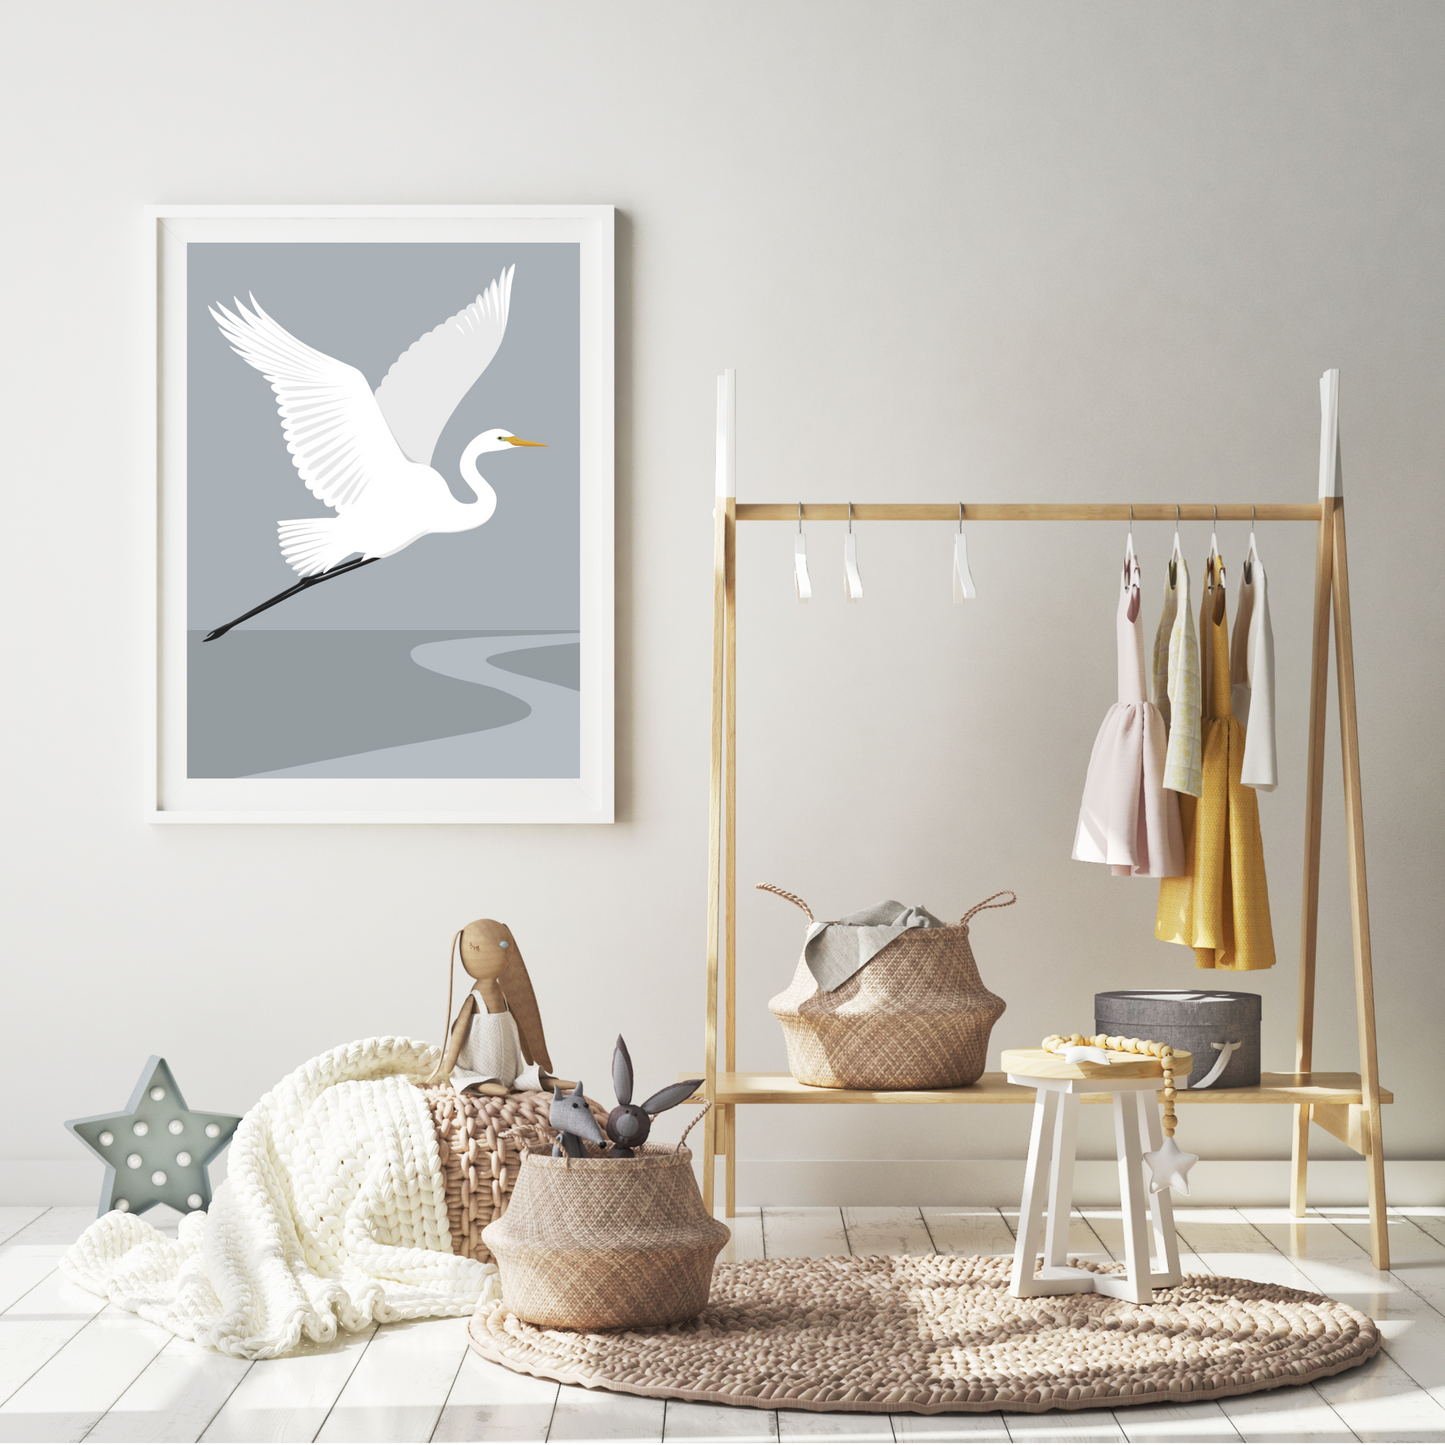 Framed fine art print of the White Heron bird, by Hansby Design New Zealand